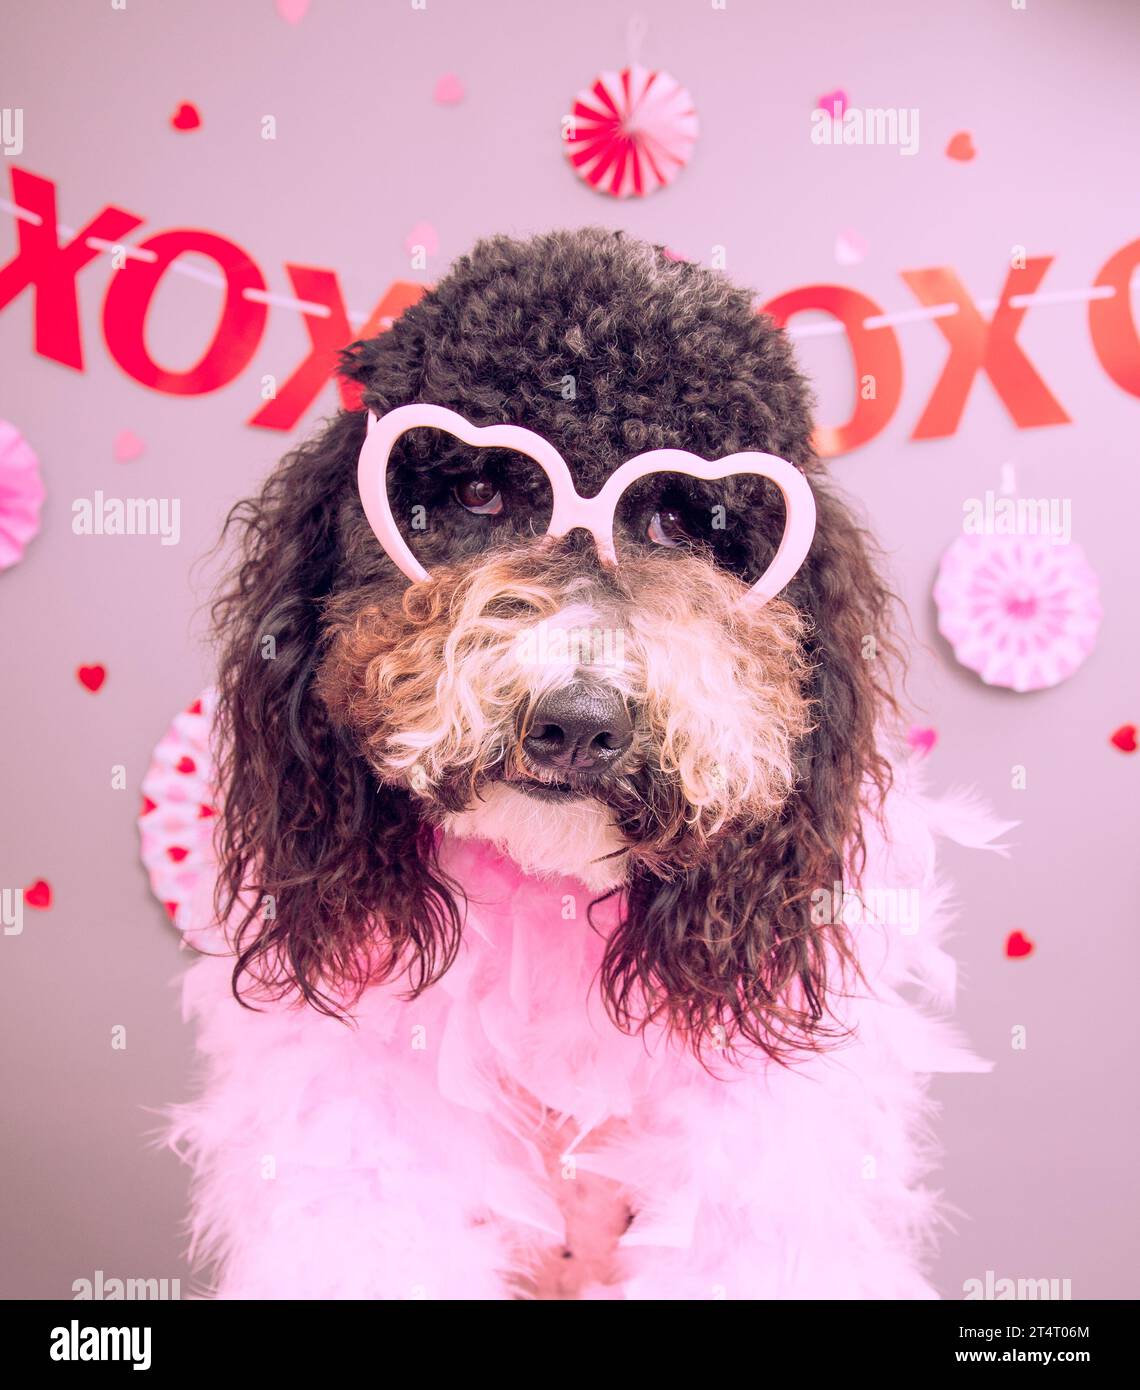 Portrait of a bernedoodle wearing heart shaped novelty glasses and a feather boa sitting in front of festive party decorations Stock Photo